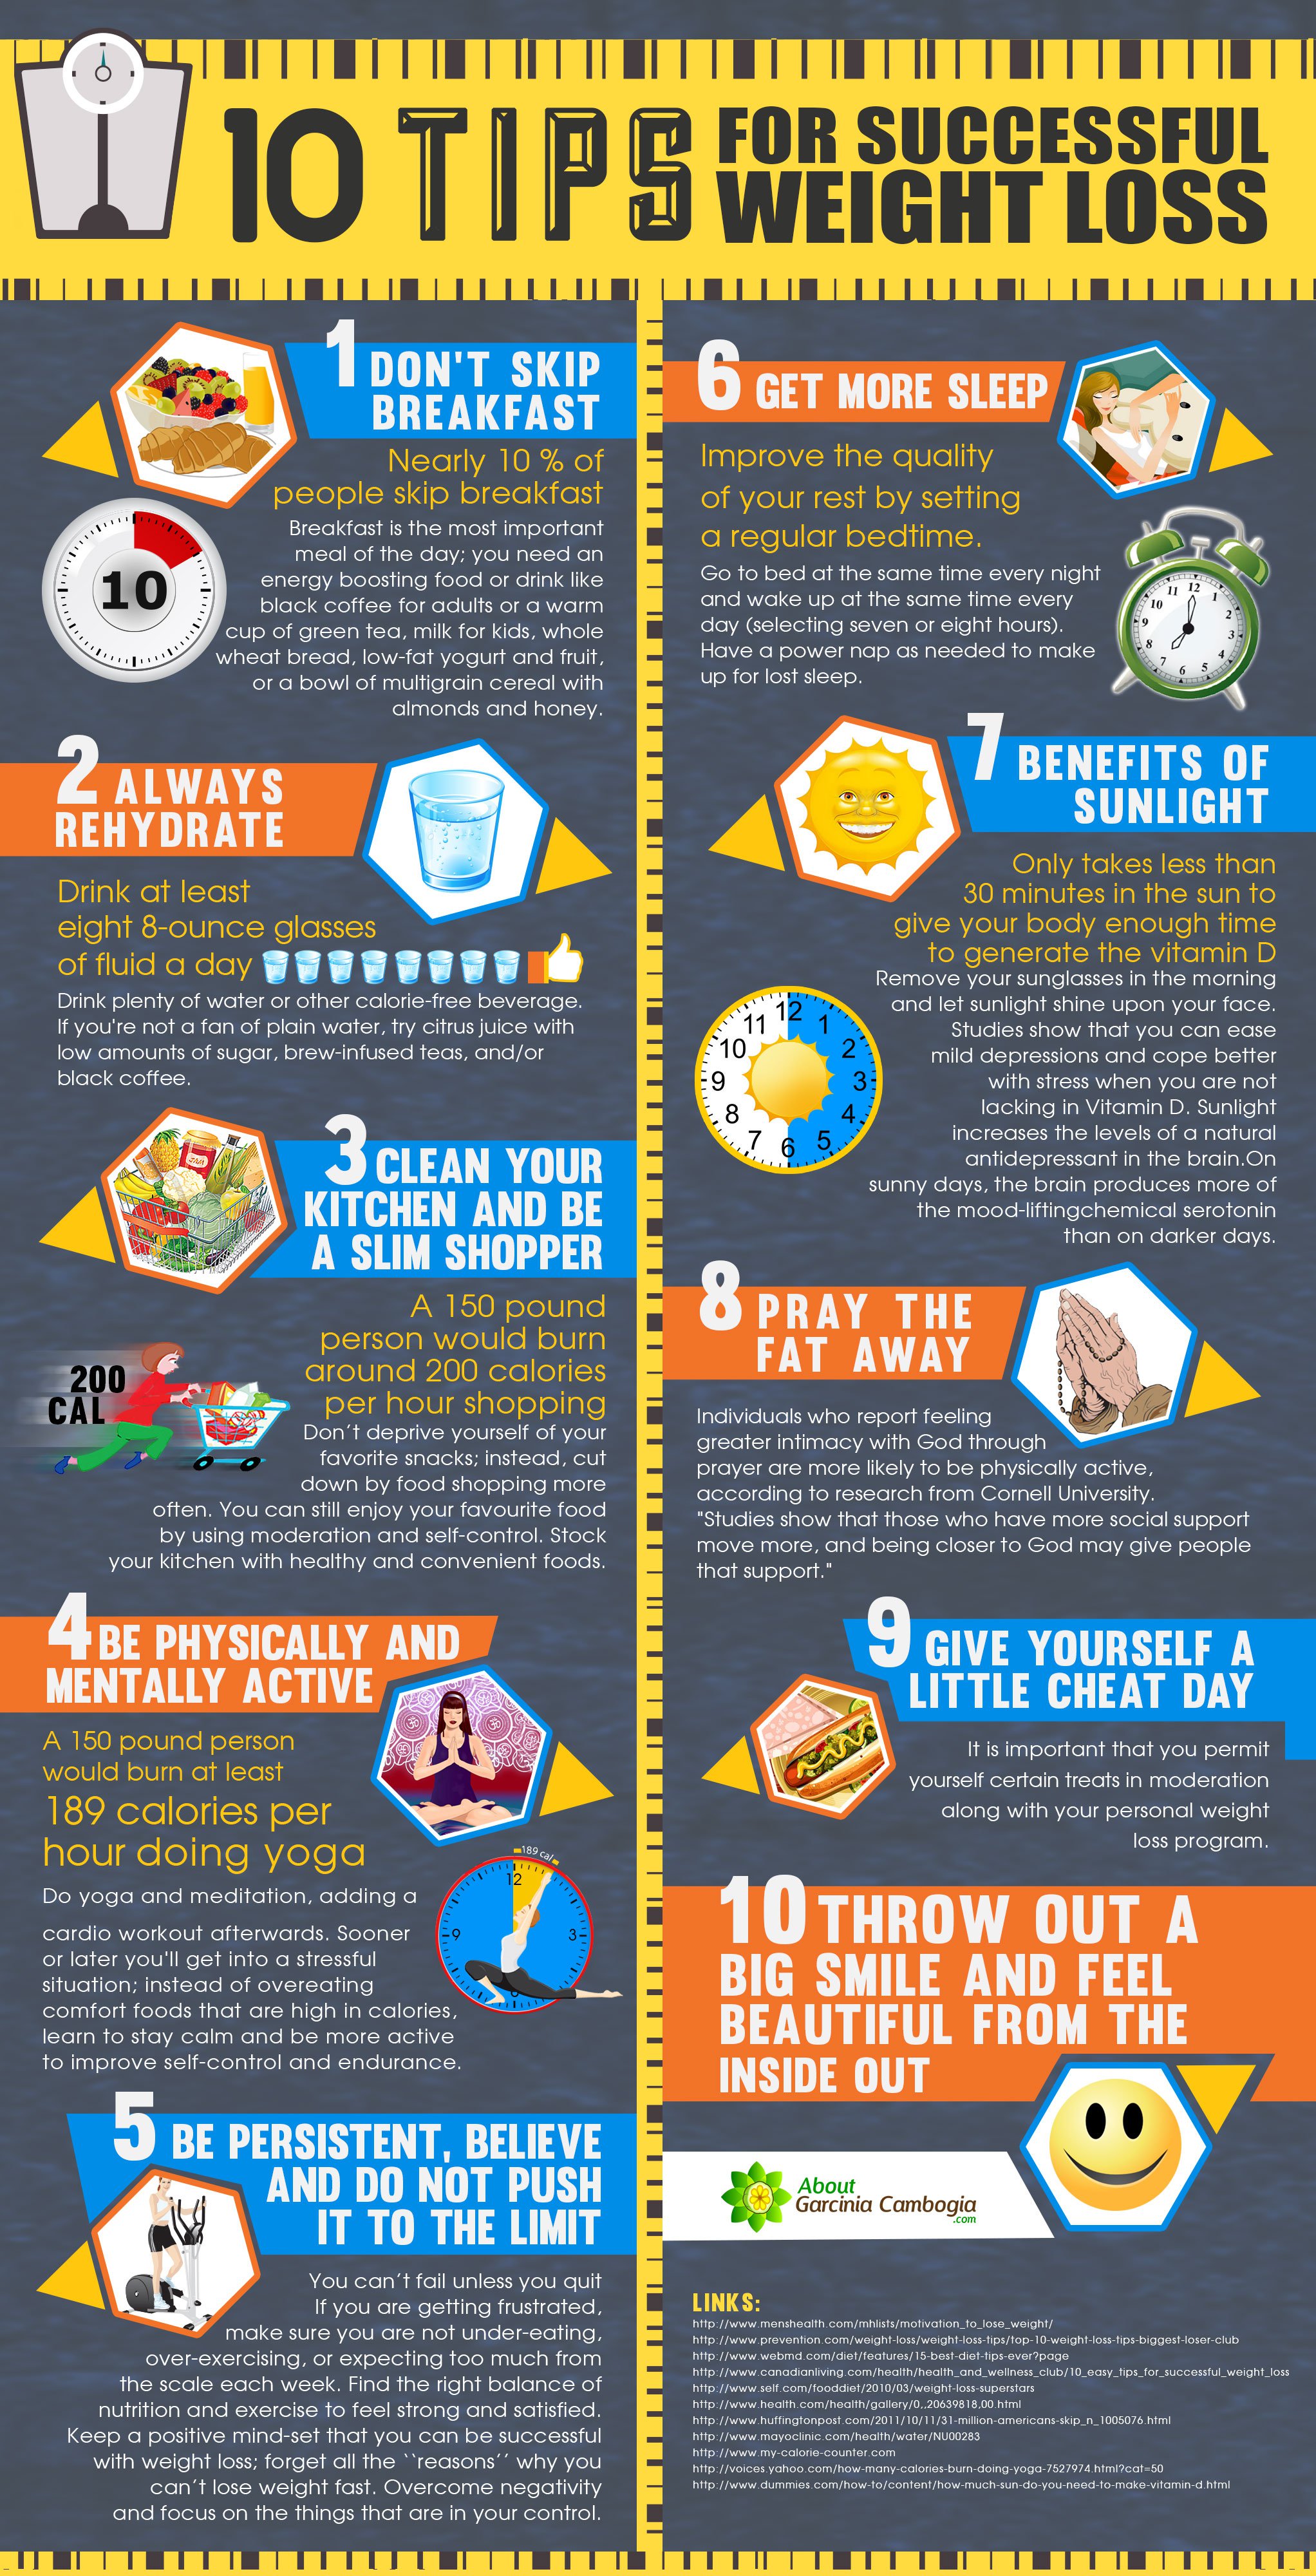 Ten tips for successful weight loss infographic.